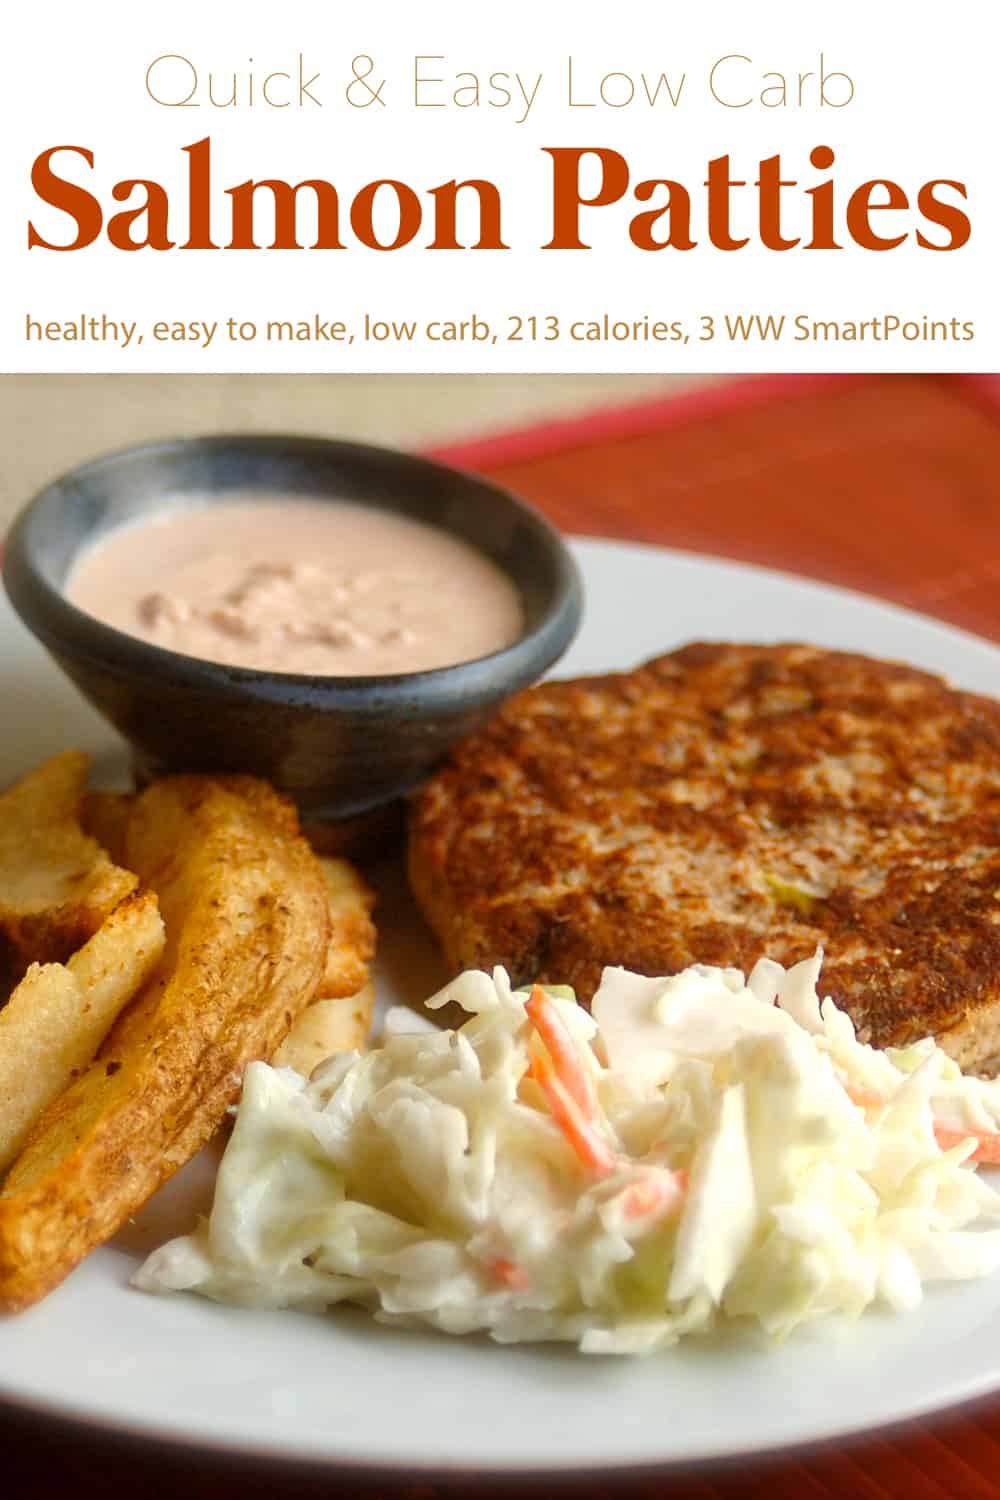 Salmon patty with cole slaw, potato wedges and horseradish sauce on white dinner plate.